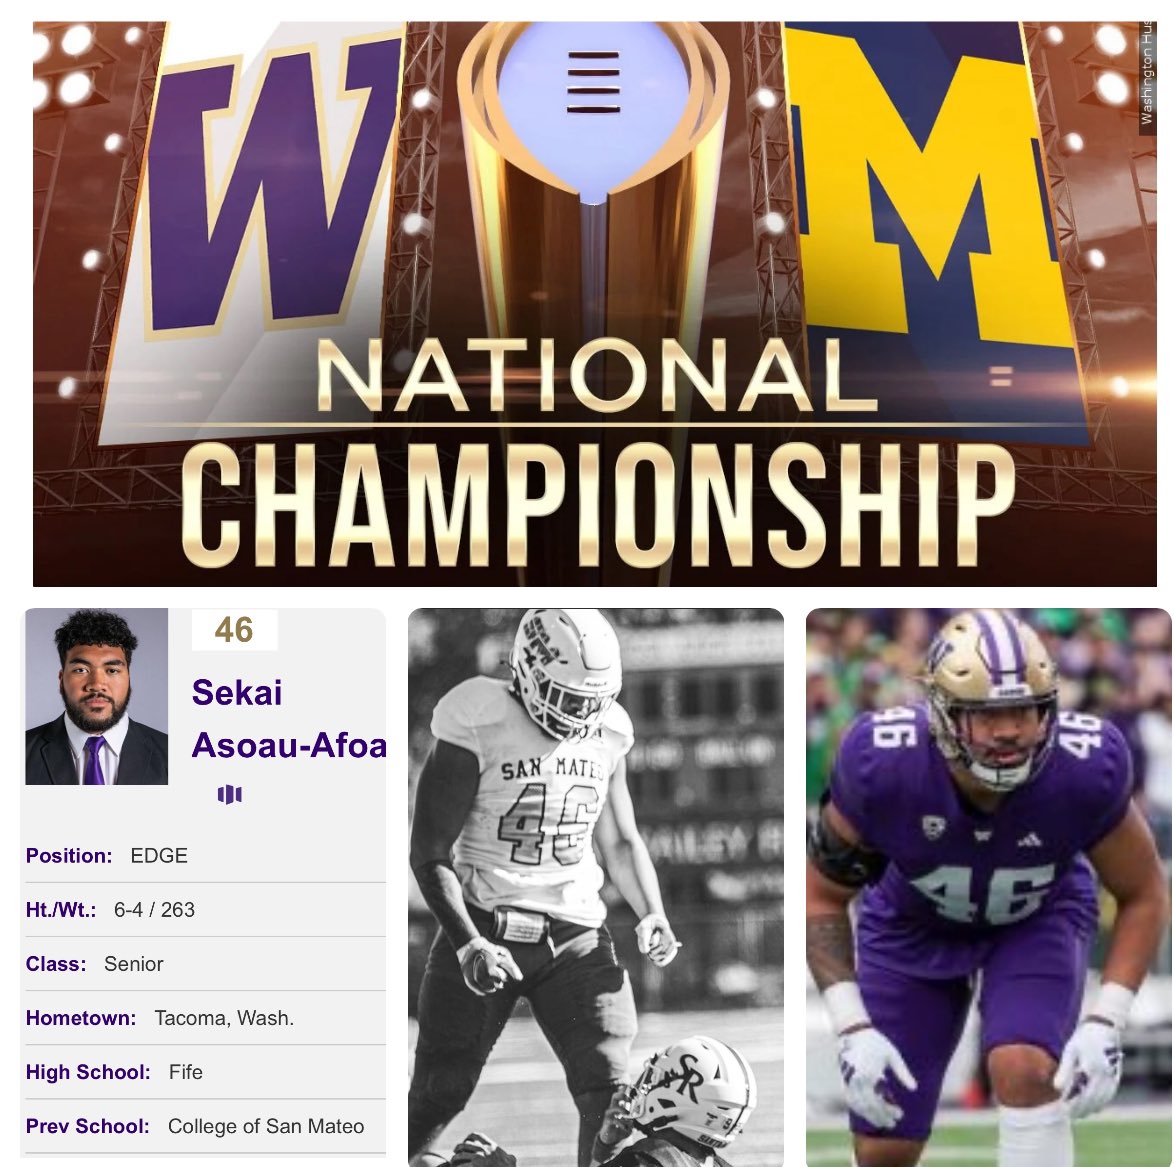 Need all of Csm Bulldog Nation to be tuned in tonight. We have one of our own playing in the CFB Championship Game. Ball out tonight Bulldog @sekai_asoau #hardeecoached @CSM_Football